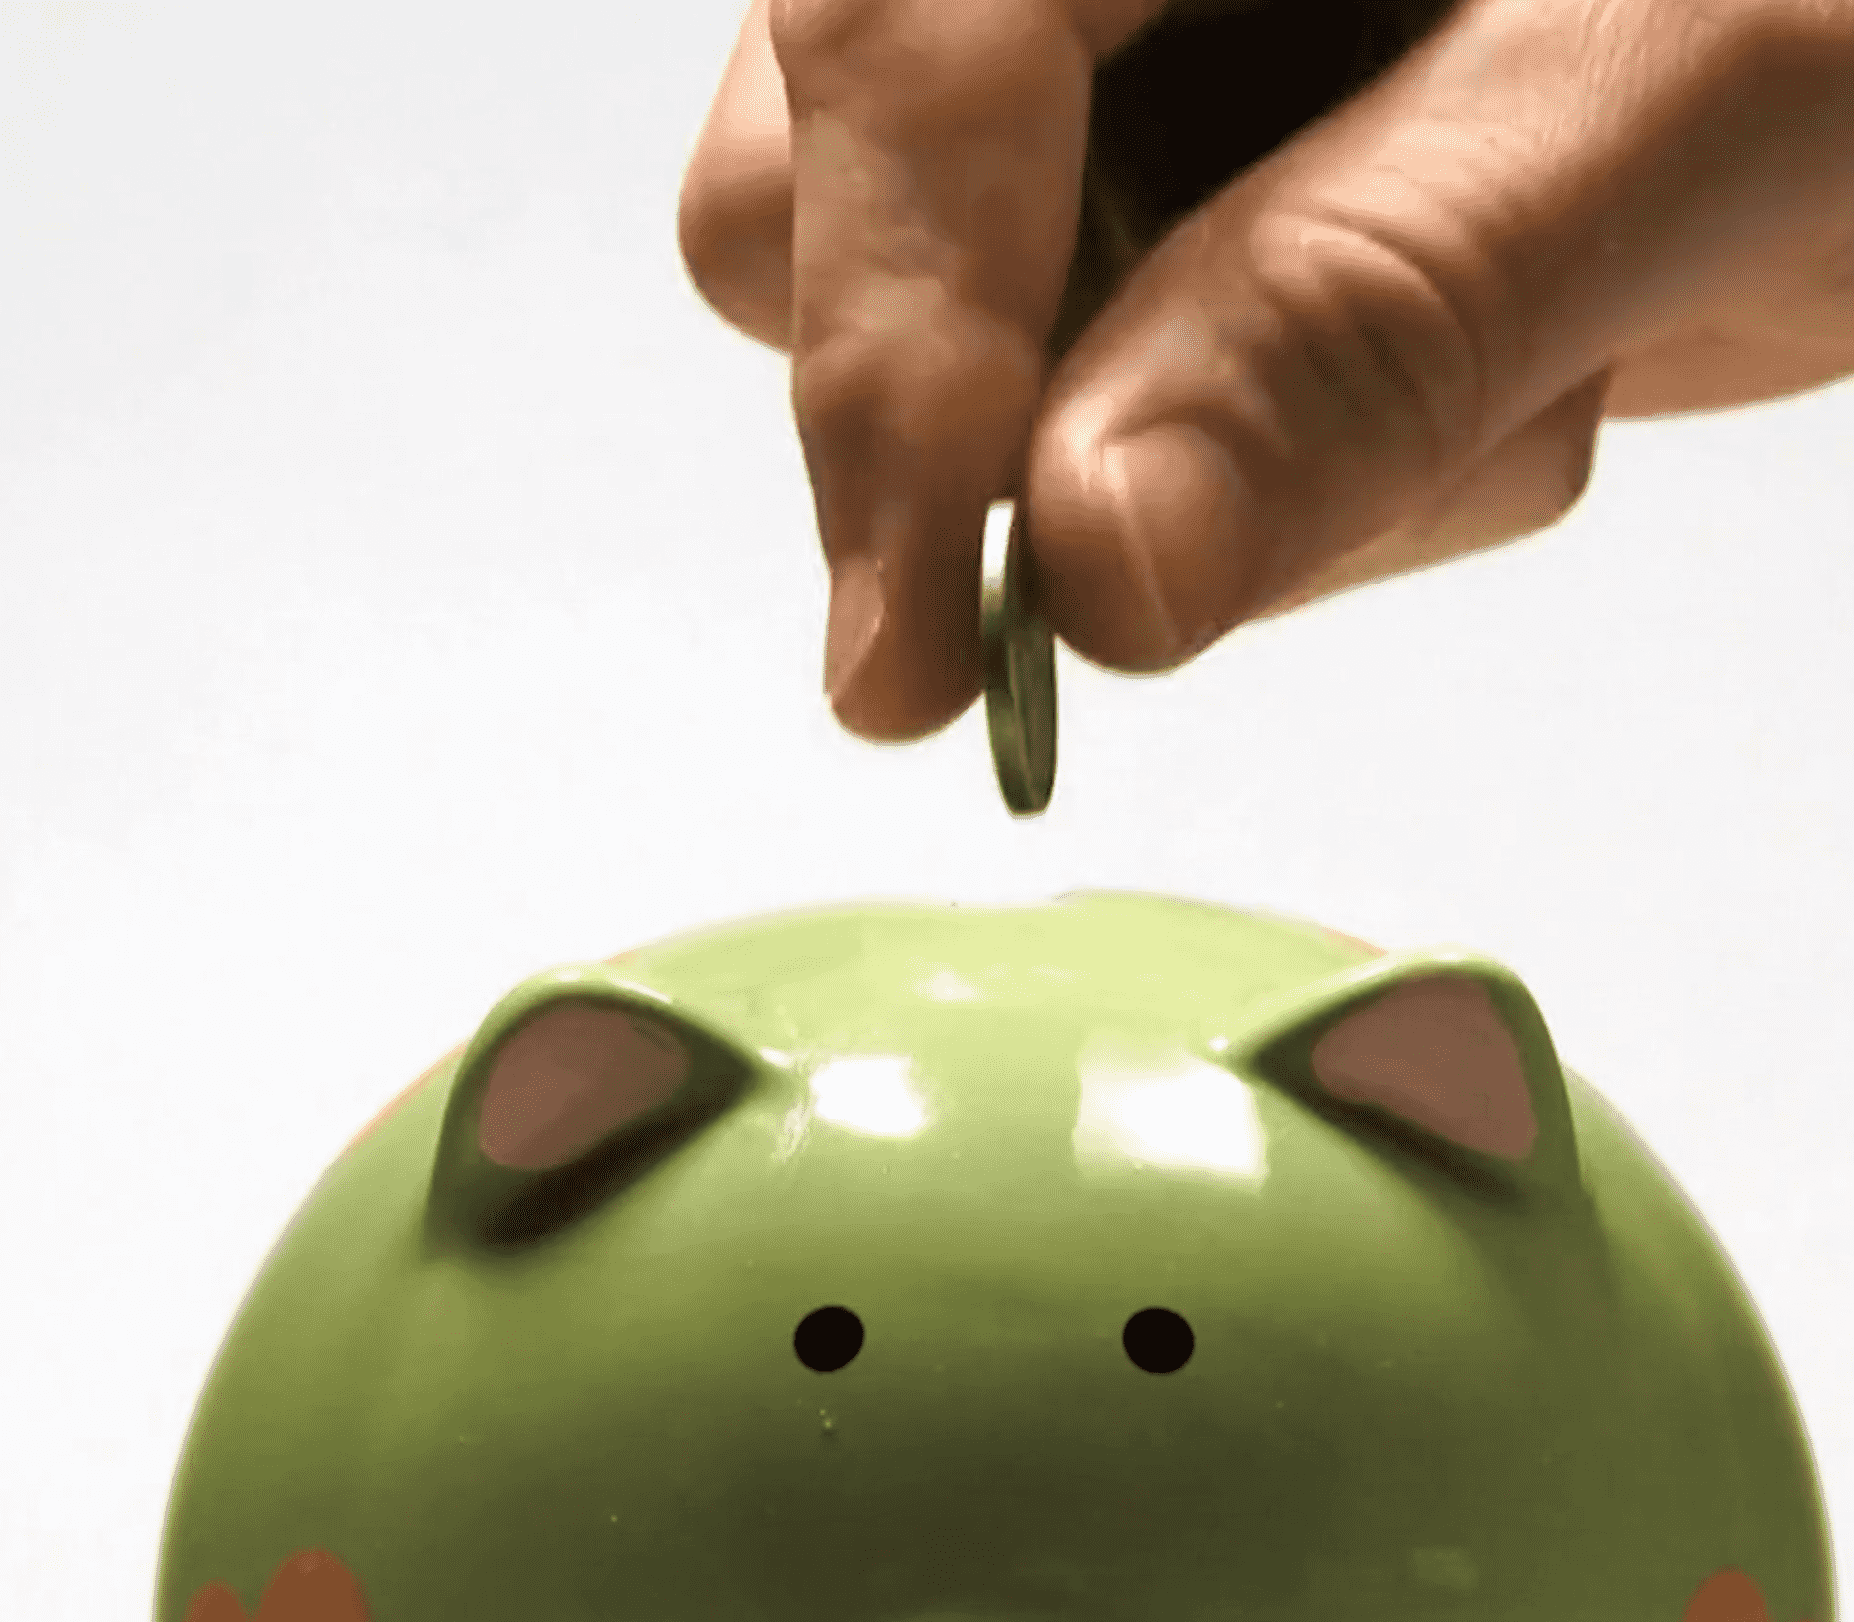 Someone is putting a coin into the piggy bank